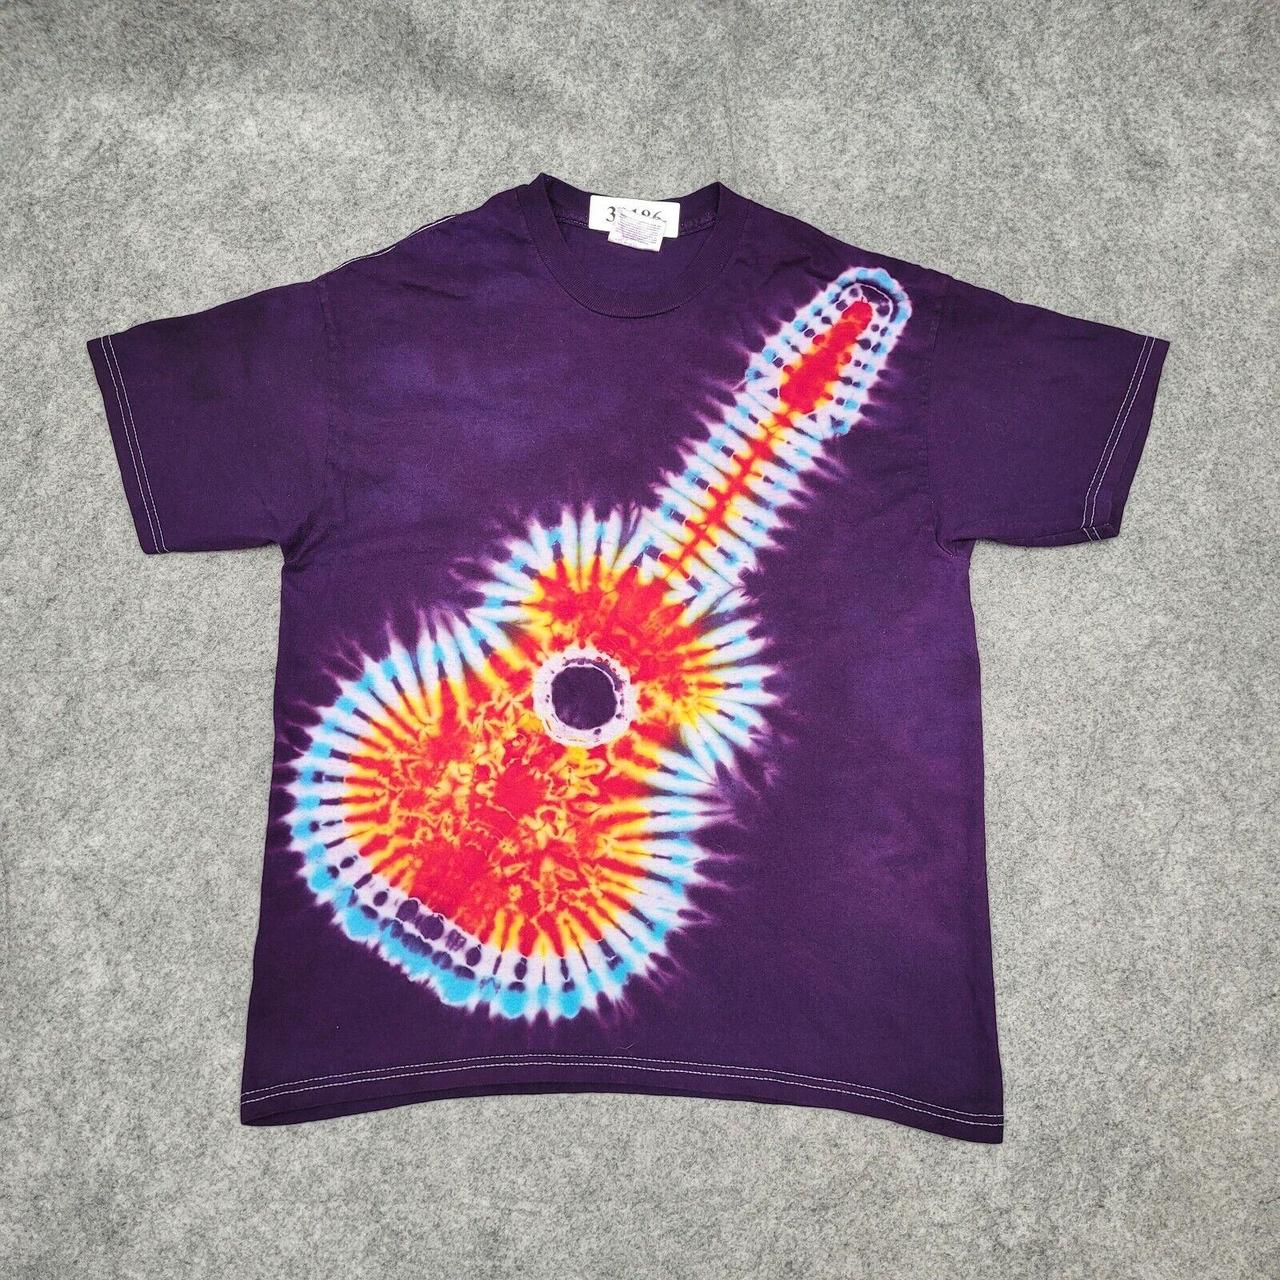 Vintage Psychedelic Guitar Tie-Dye T-Shirt Youth Depop - XL